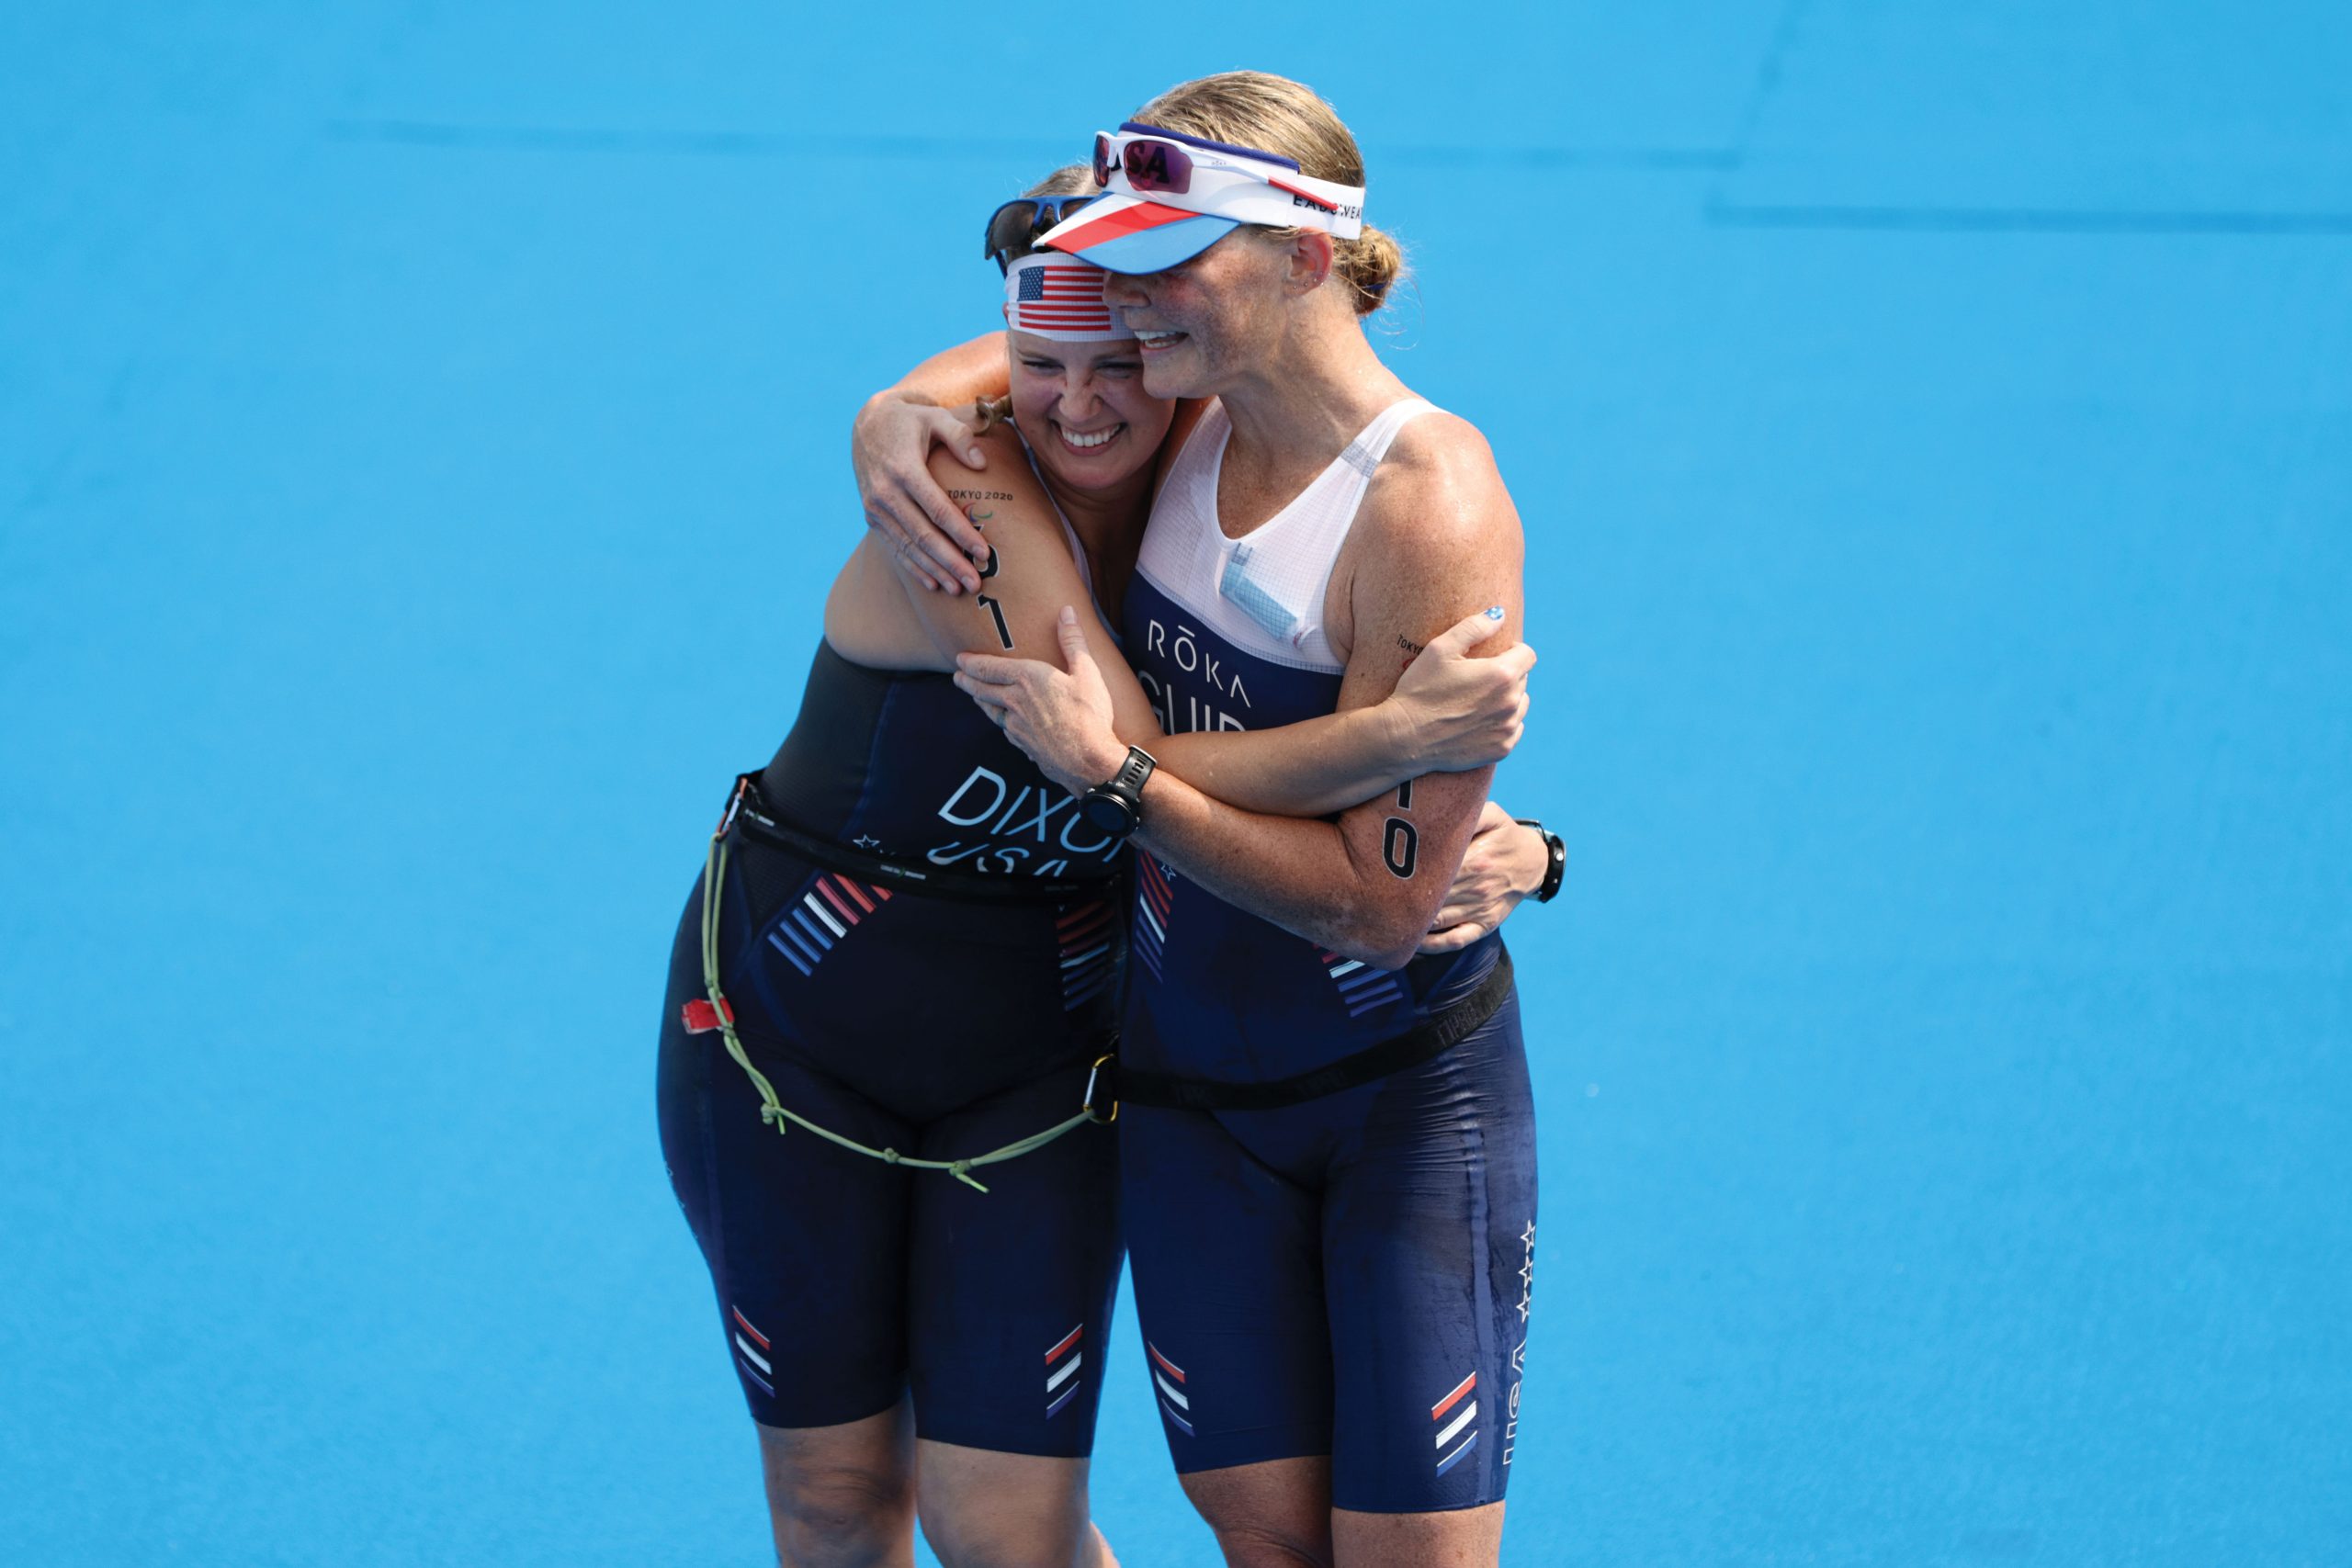 Amy Dixon and her guide Kirsten Sass hug after crossing the finish line in the 2020 Paralympic Games